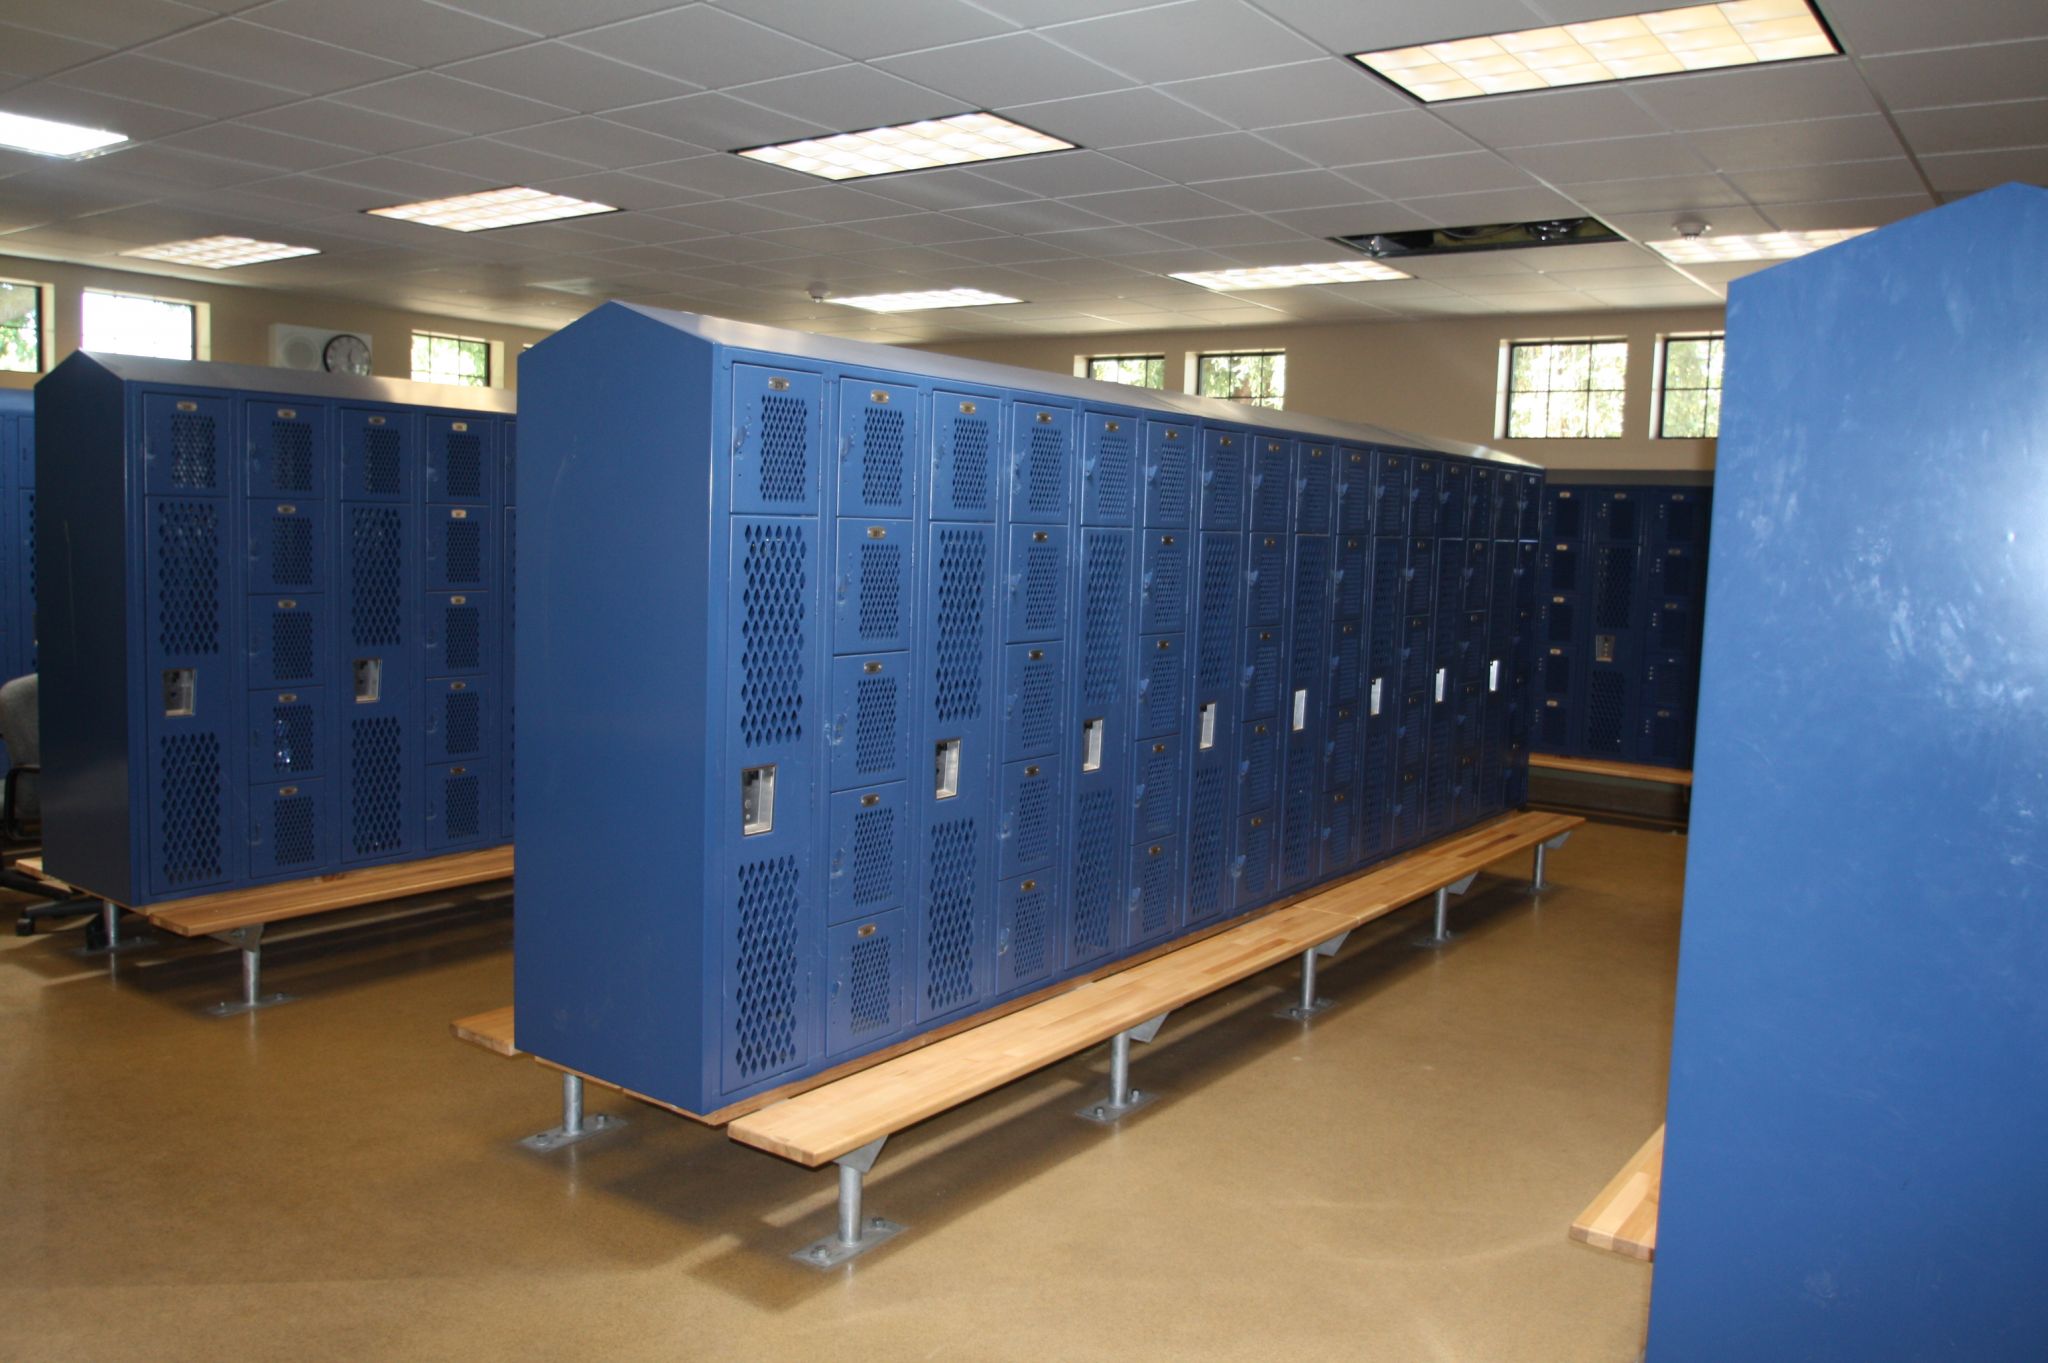 Lockers at Moreland Middle School